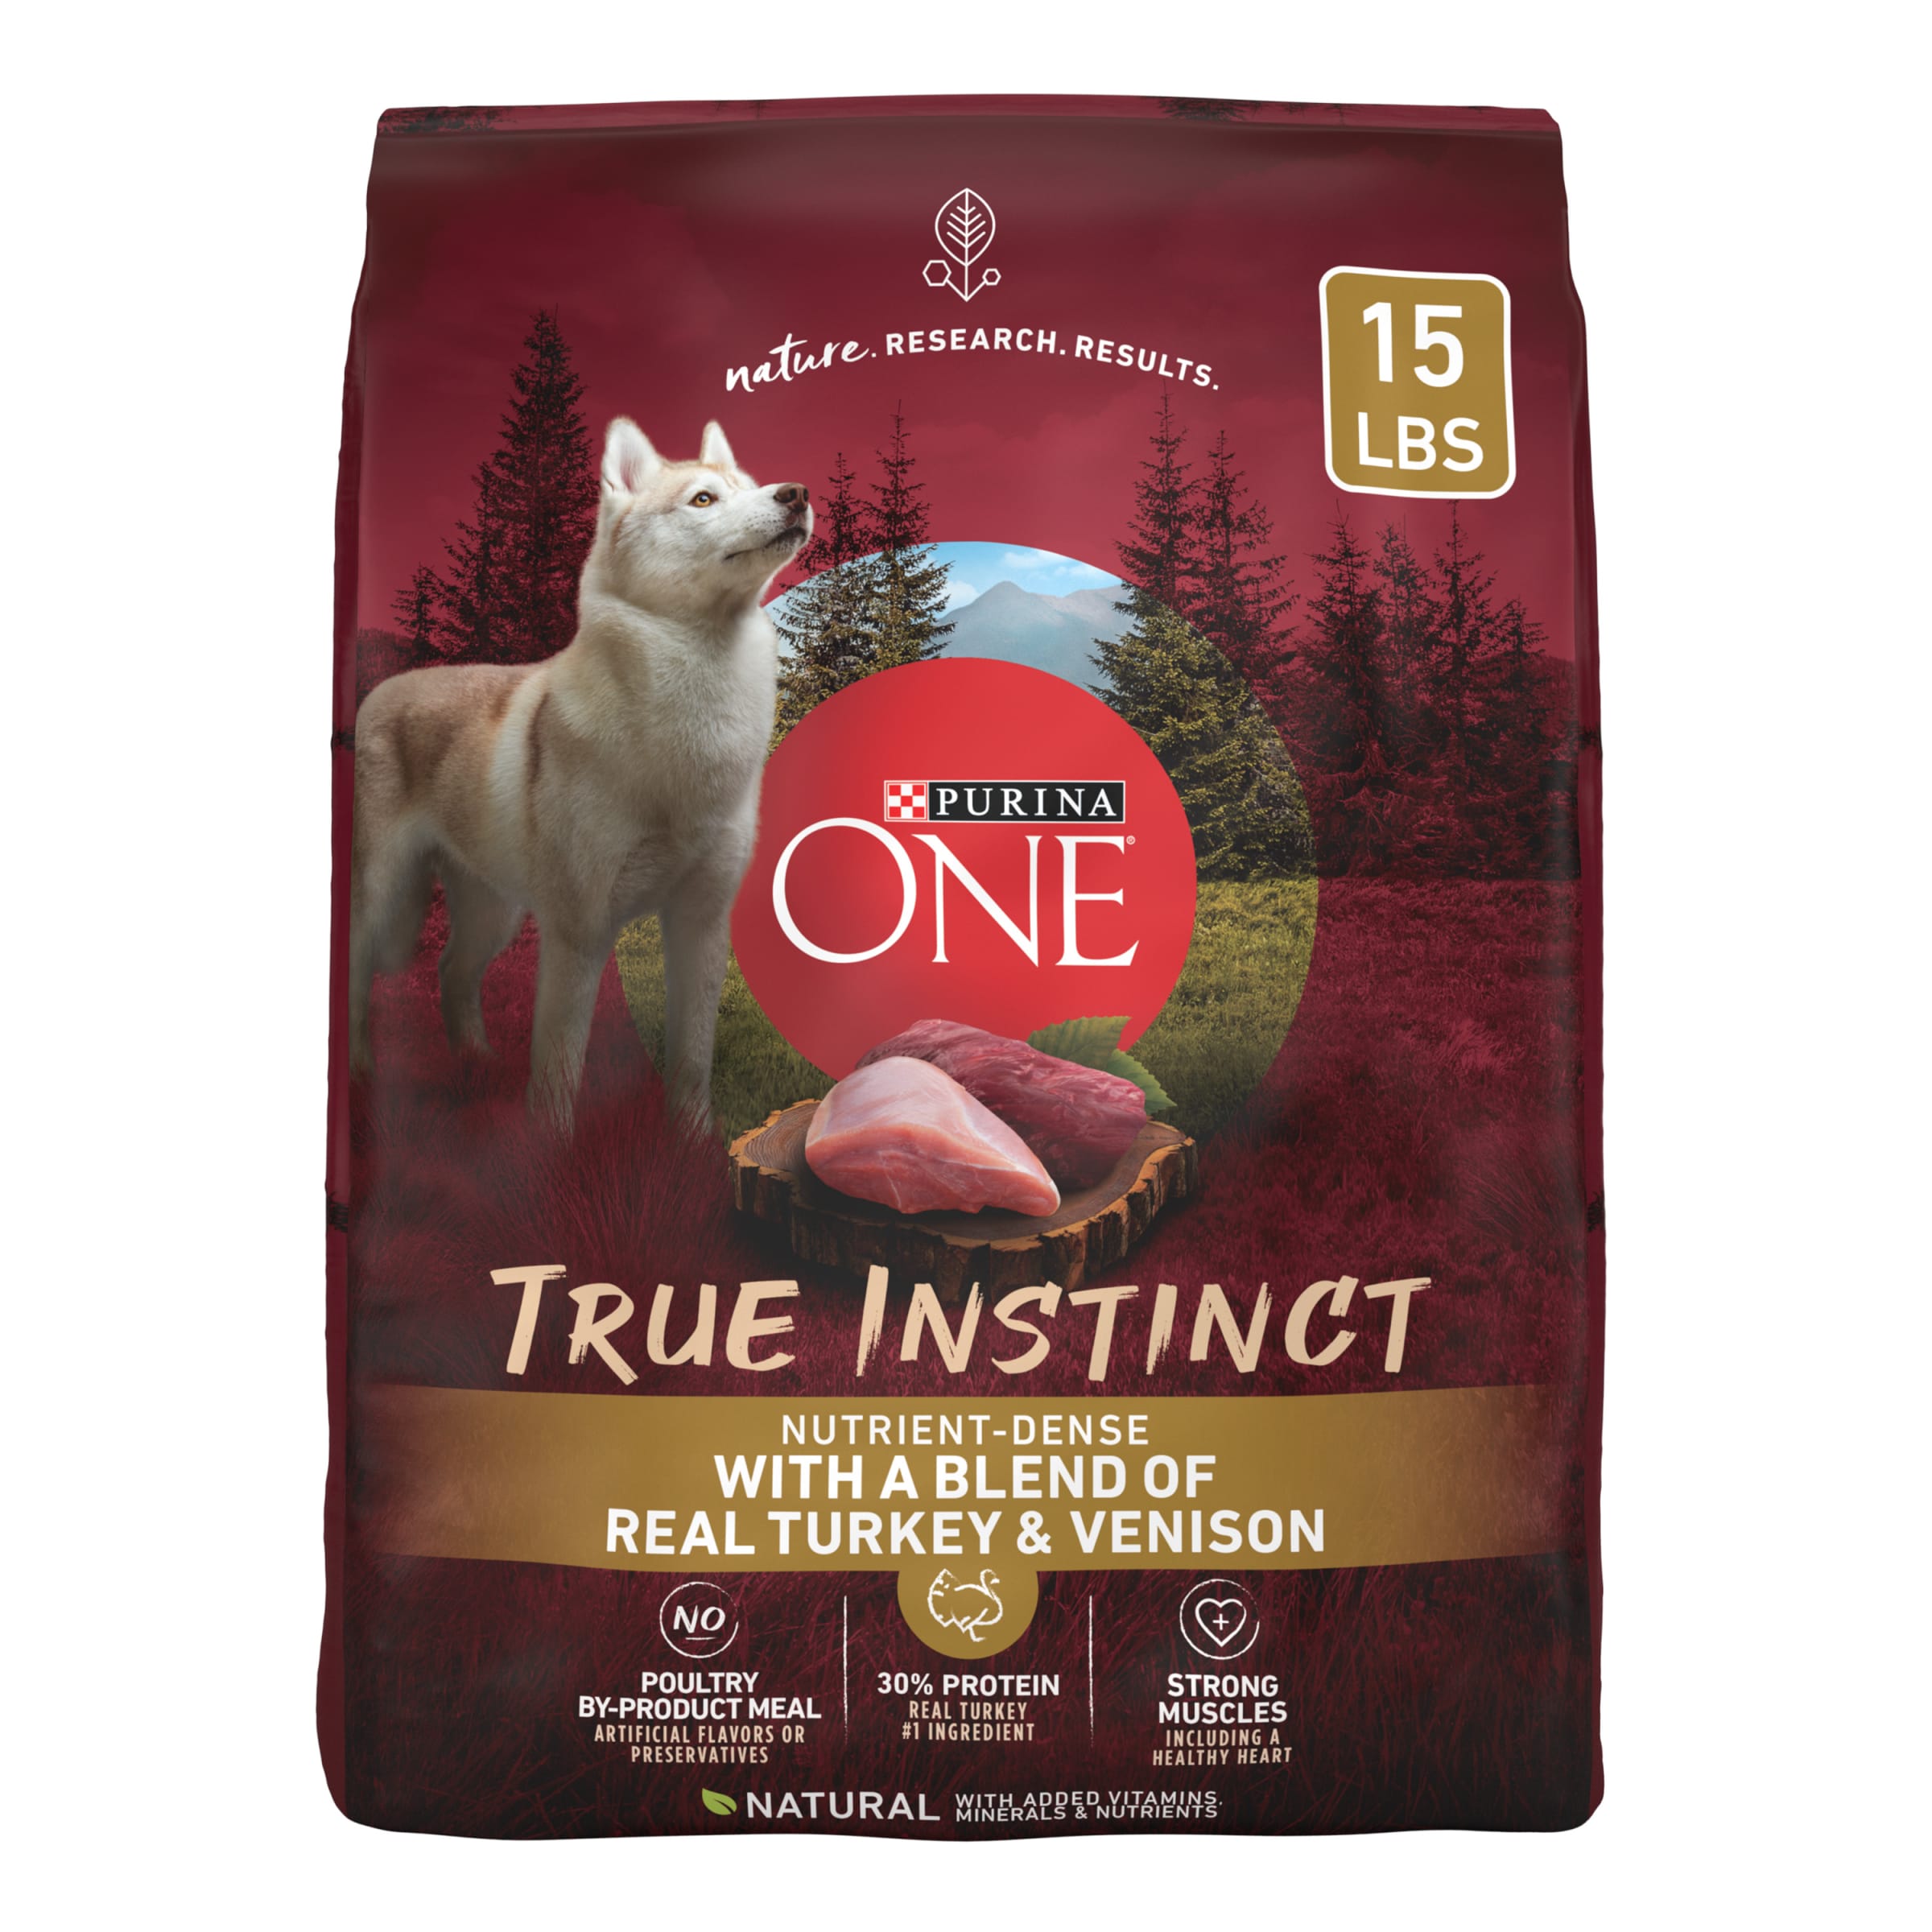 Purina One True Instinct Dry Dog Food for Adult Dogs, Real Turkey & Venison, 15 lb Bag - image 1 of 10